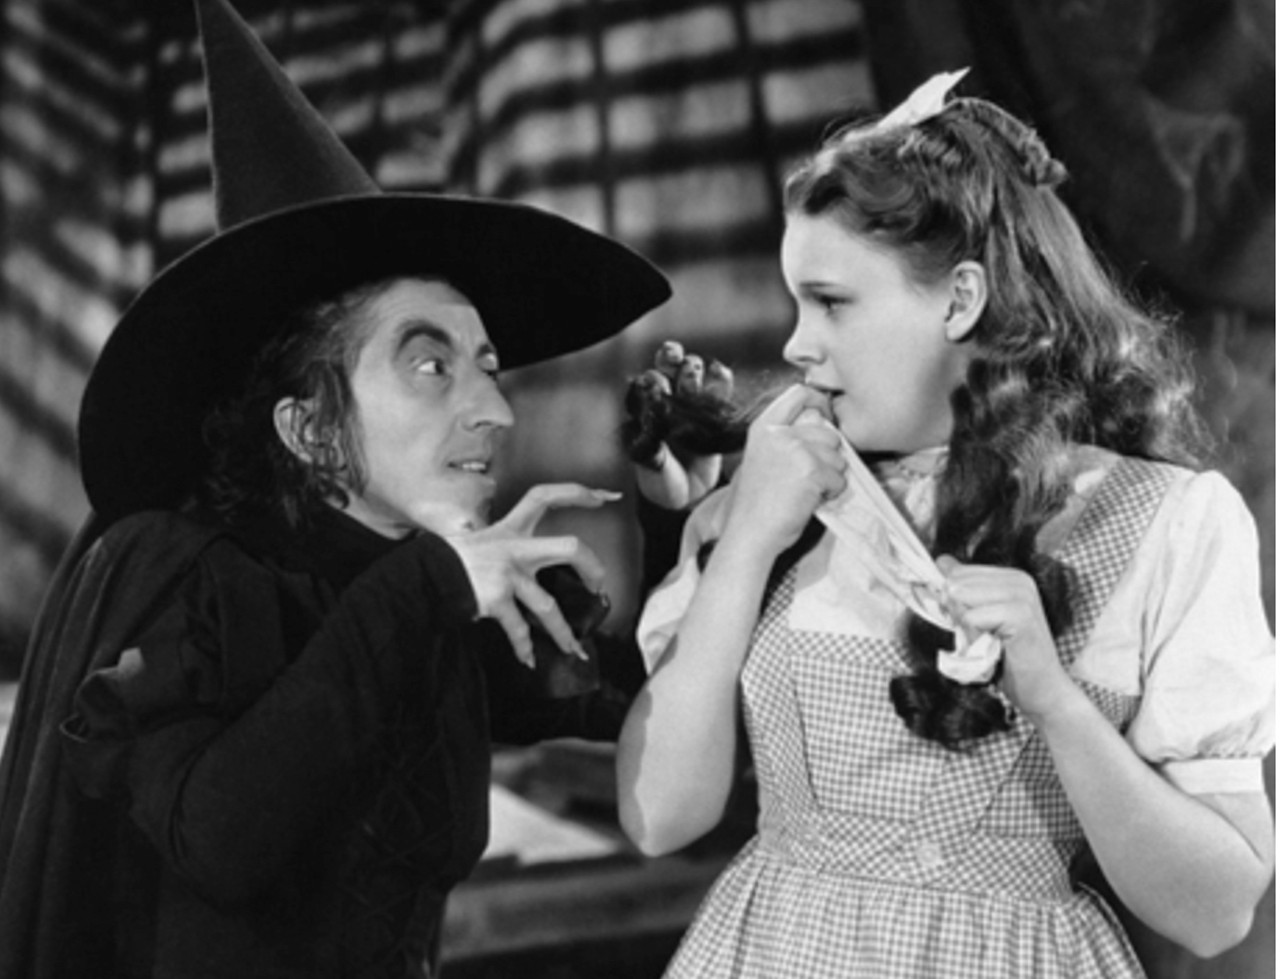 
6. The Wicked Witch of the West originally hailed in Cleveland. Actress Margaret Hamilton, who played the witch in 'The Wizard of Oz,' was born here. Take that, Hollywood!
(Photo via Wikimedia)